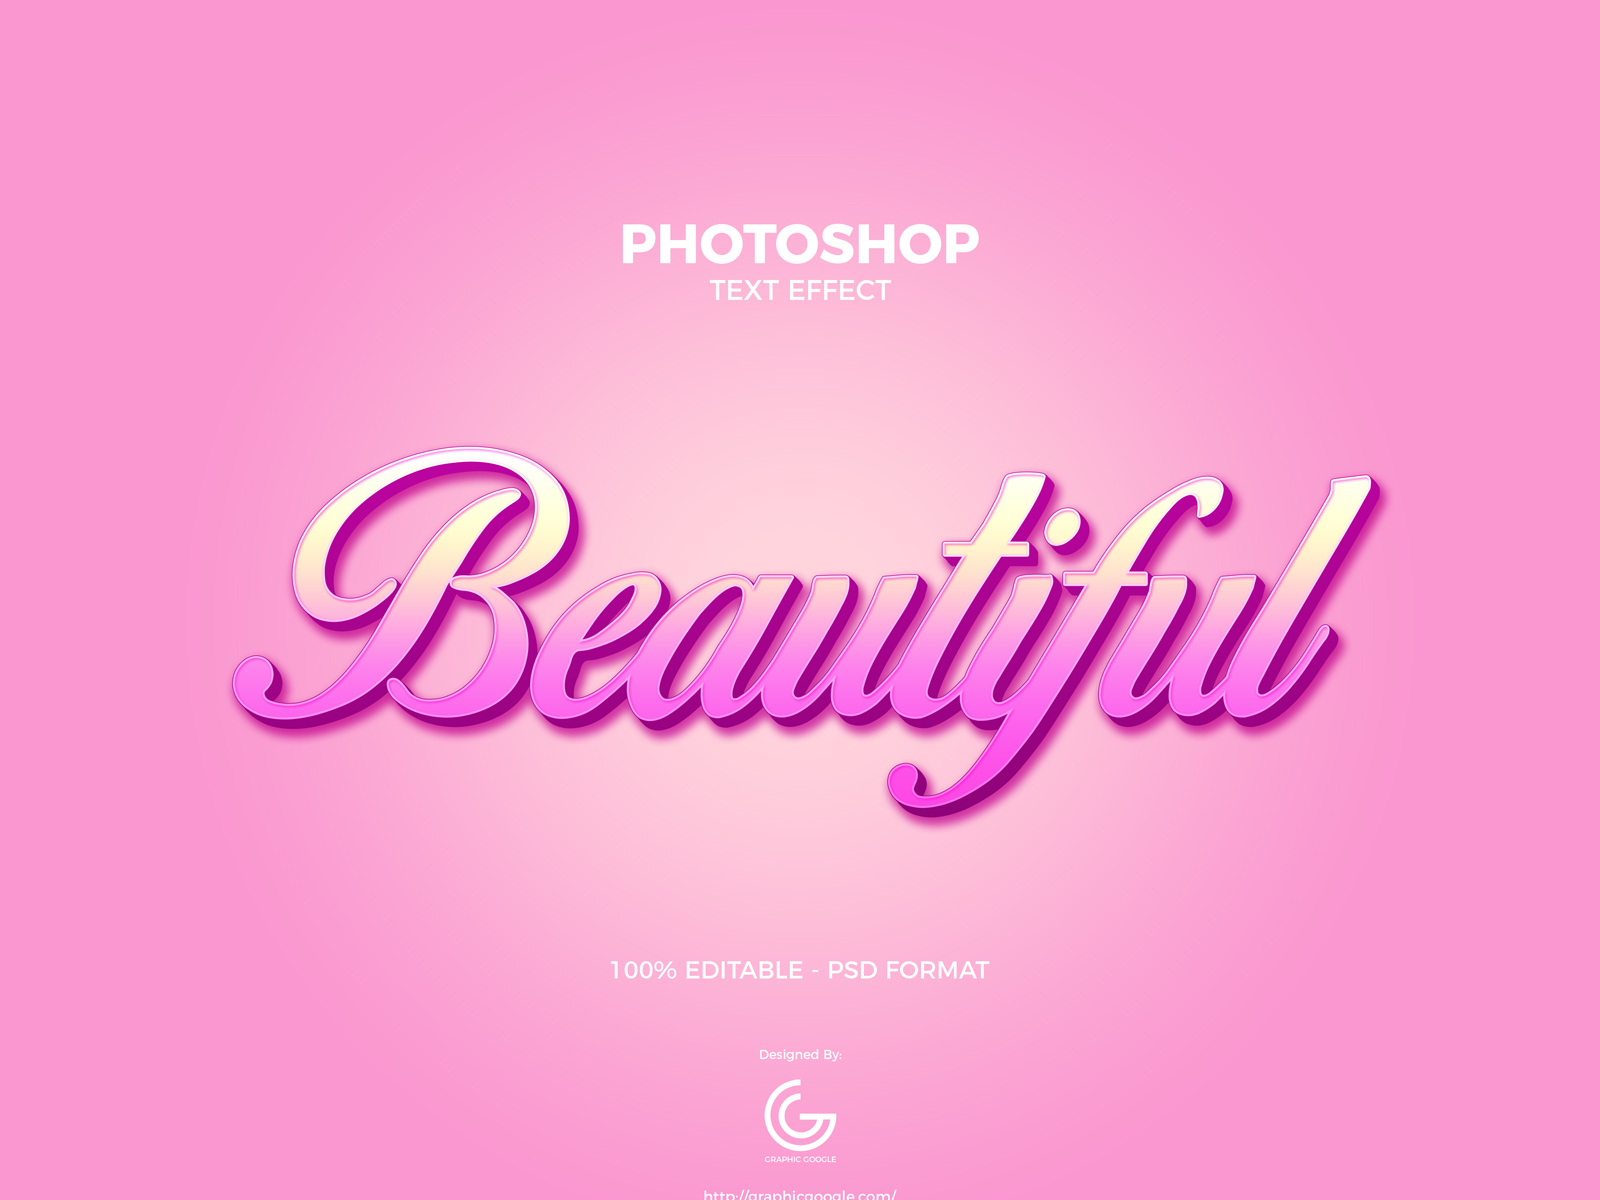 photoshop text psd free download